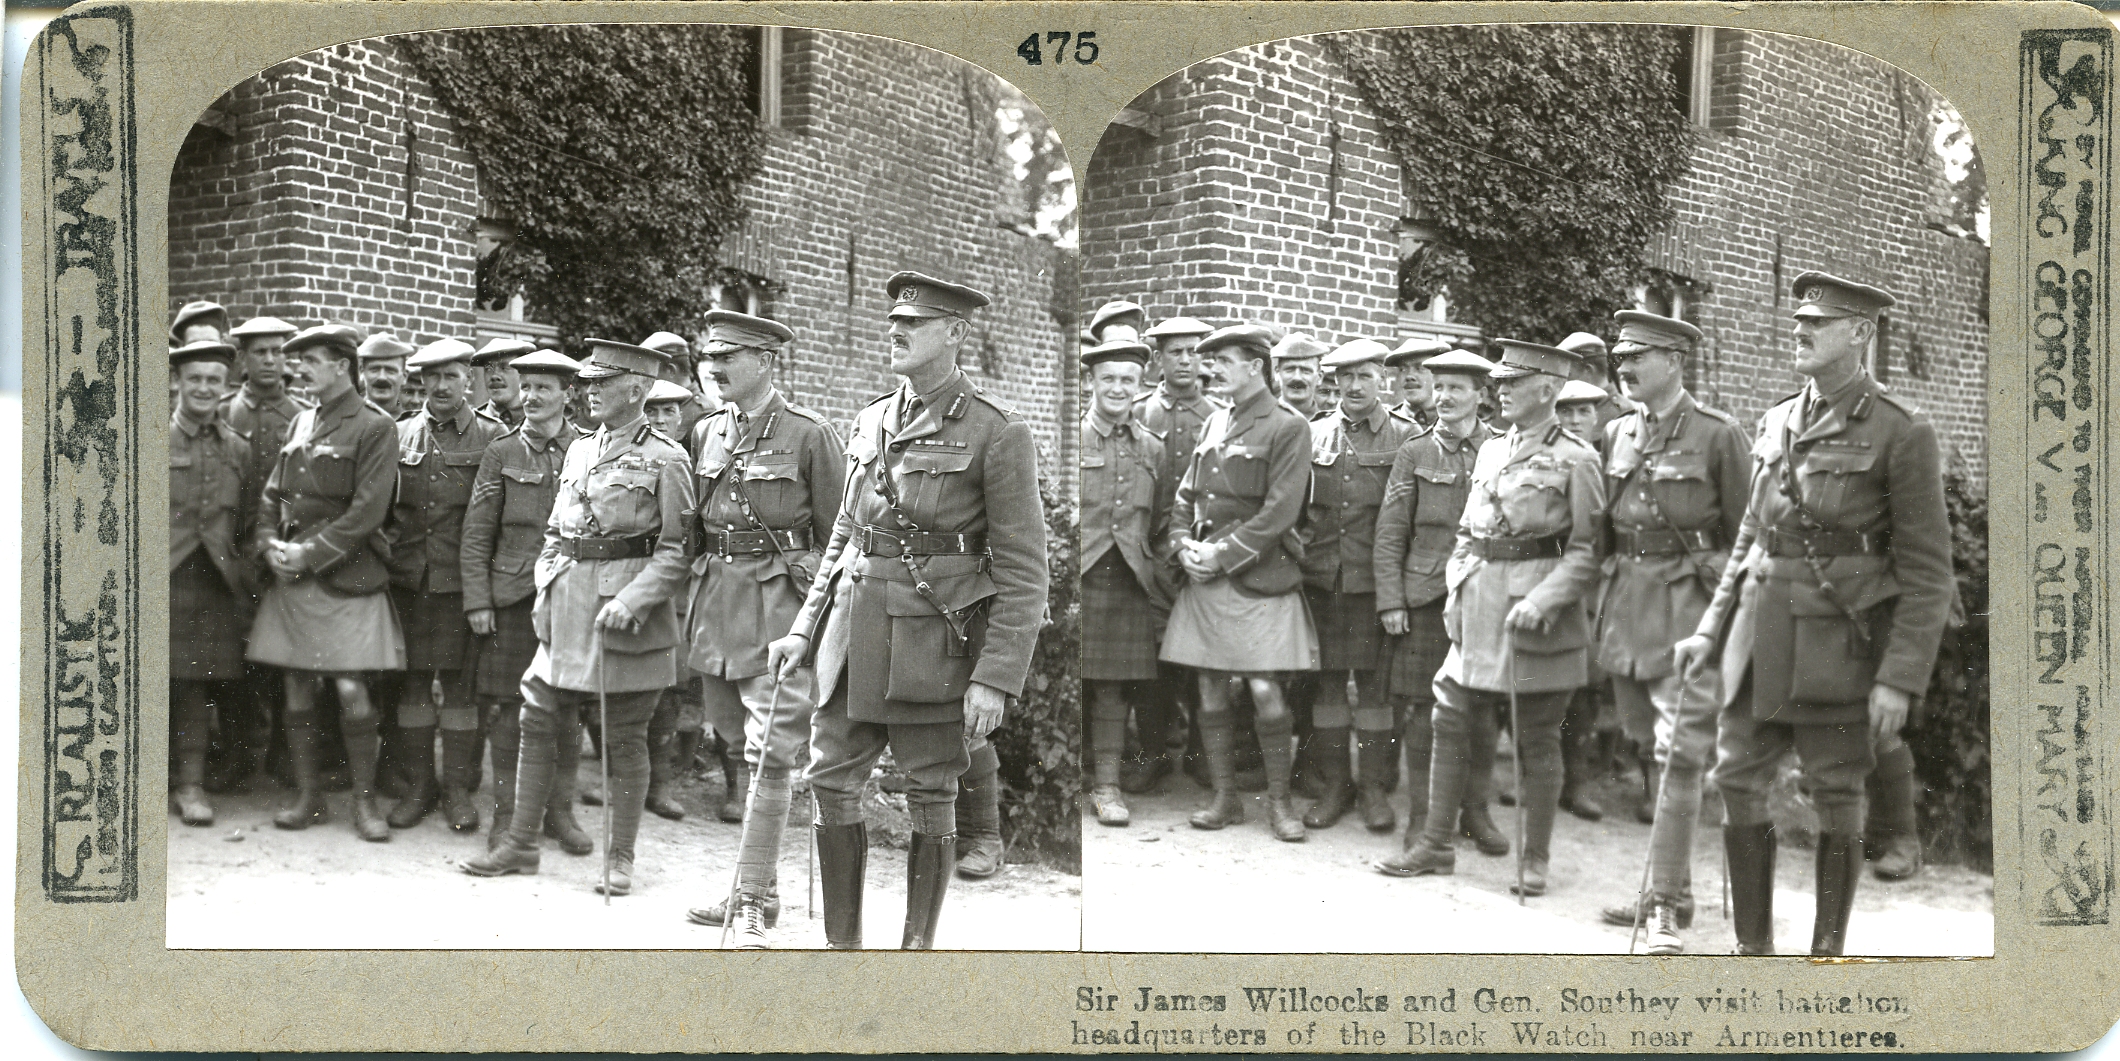 Sir James Willcocks and Gen. Southey visit battalion headquarters of the Black Watch near Armentieres